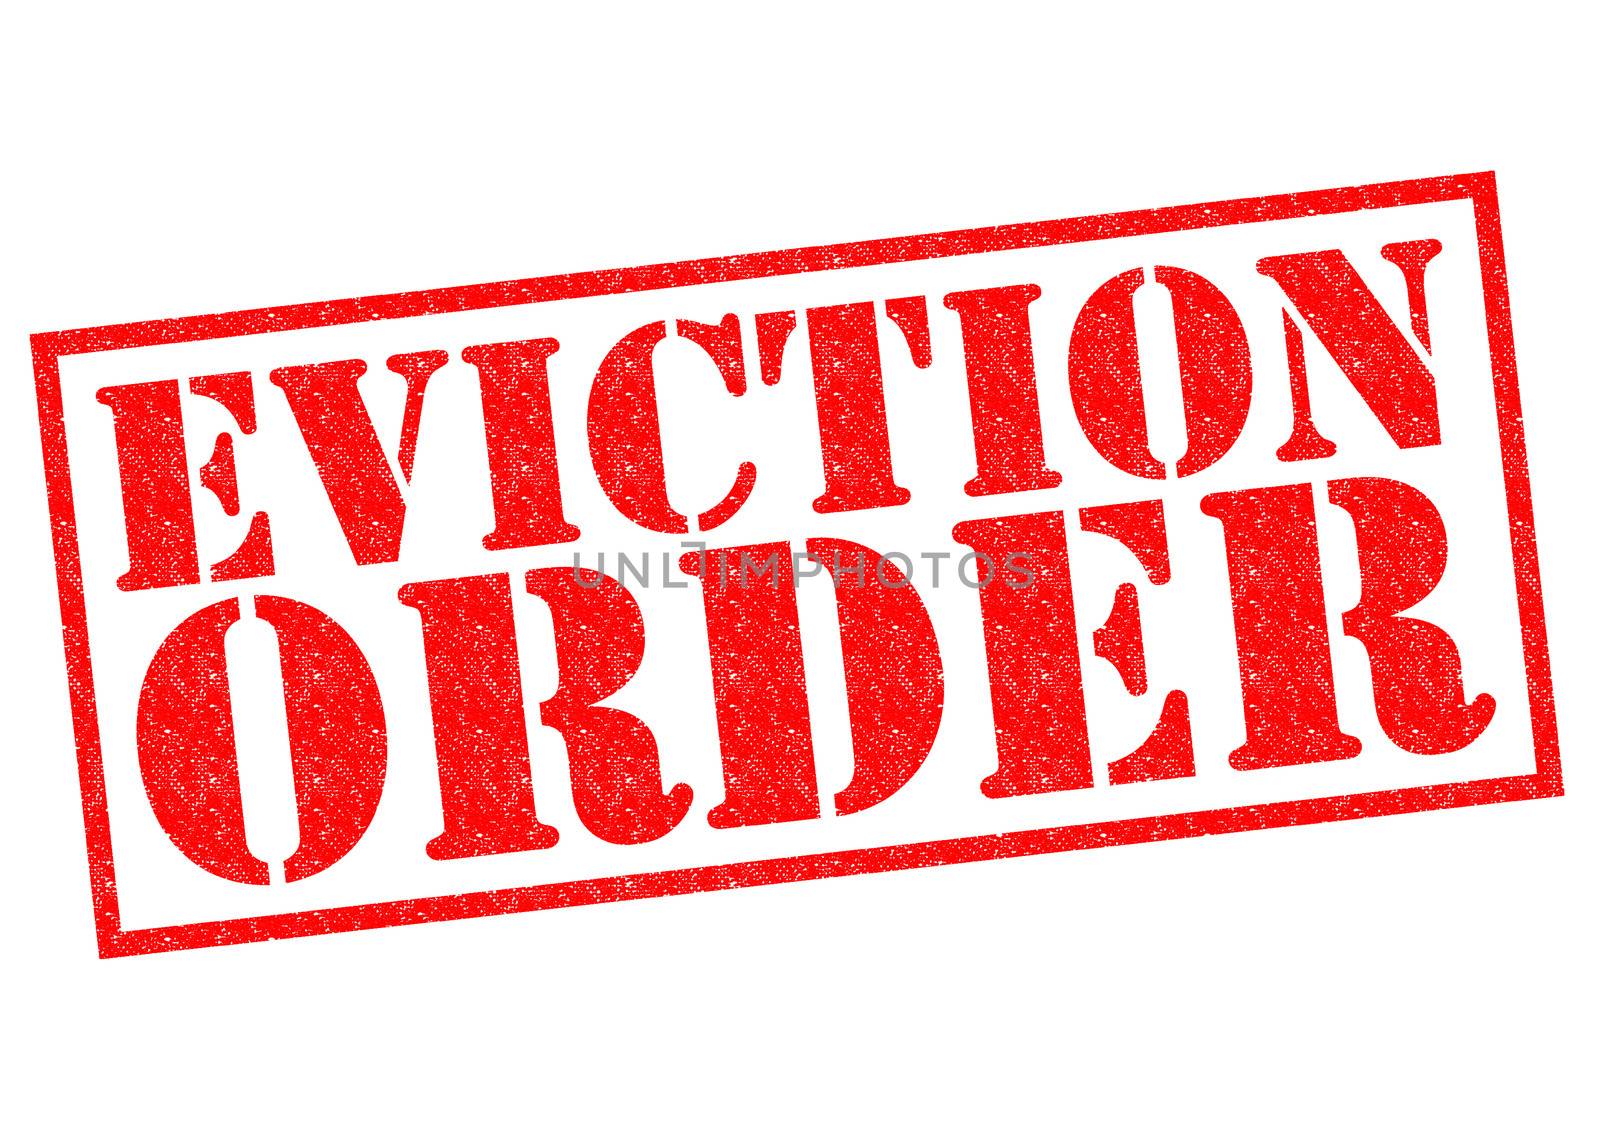 EVICTION ORDER red Rubber Stamp over a white background.